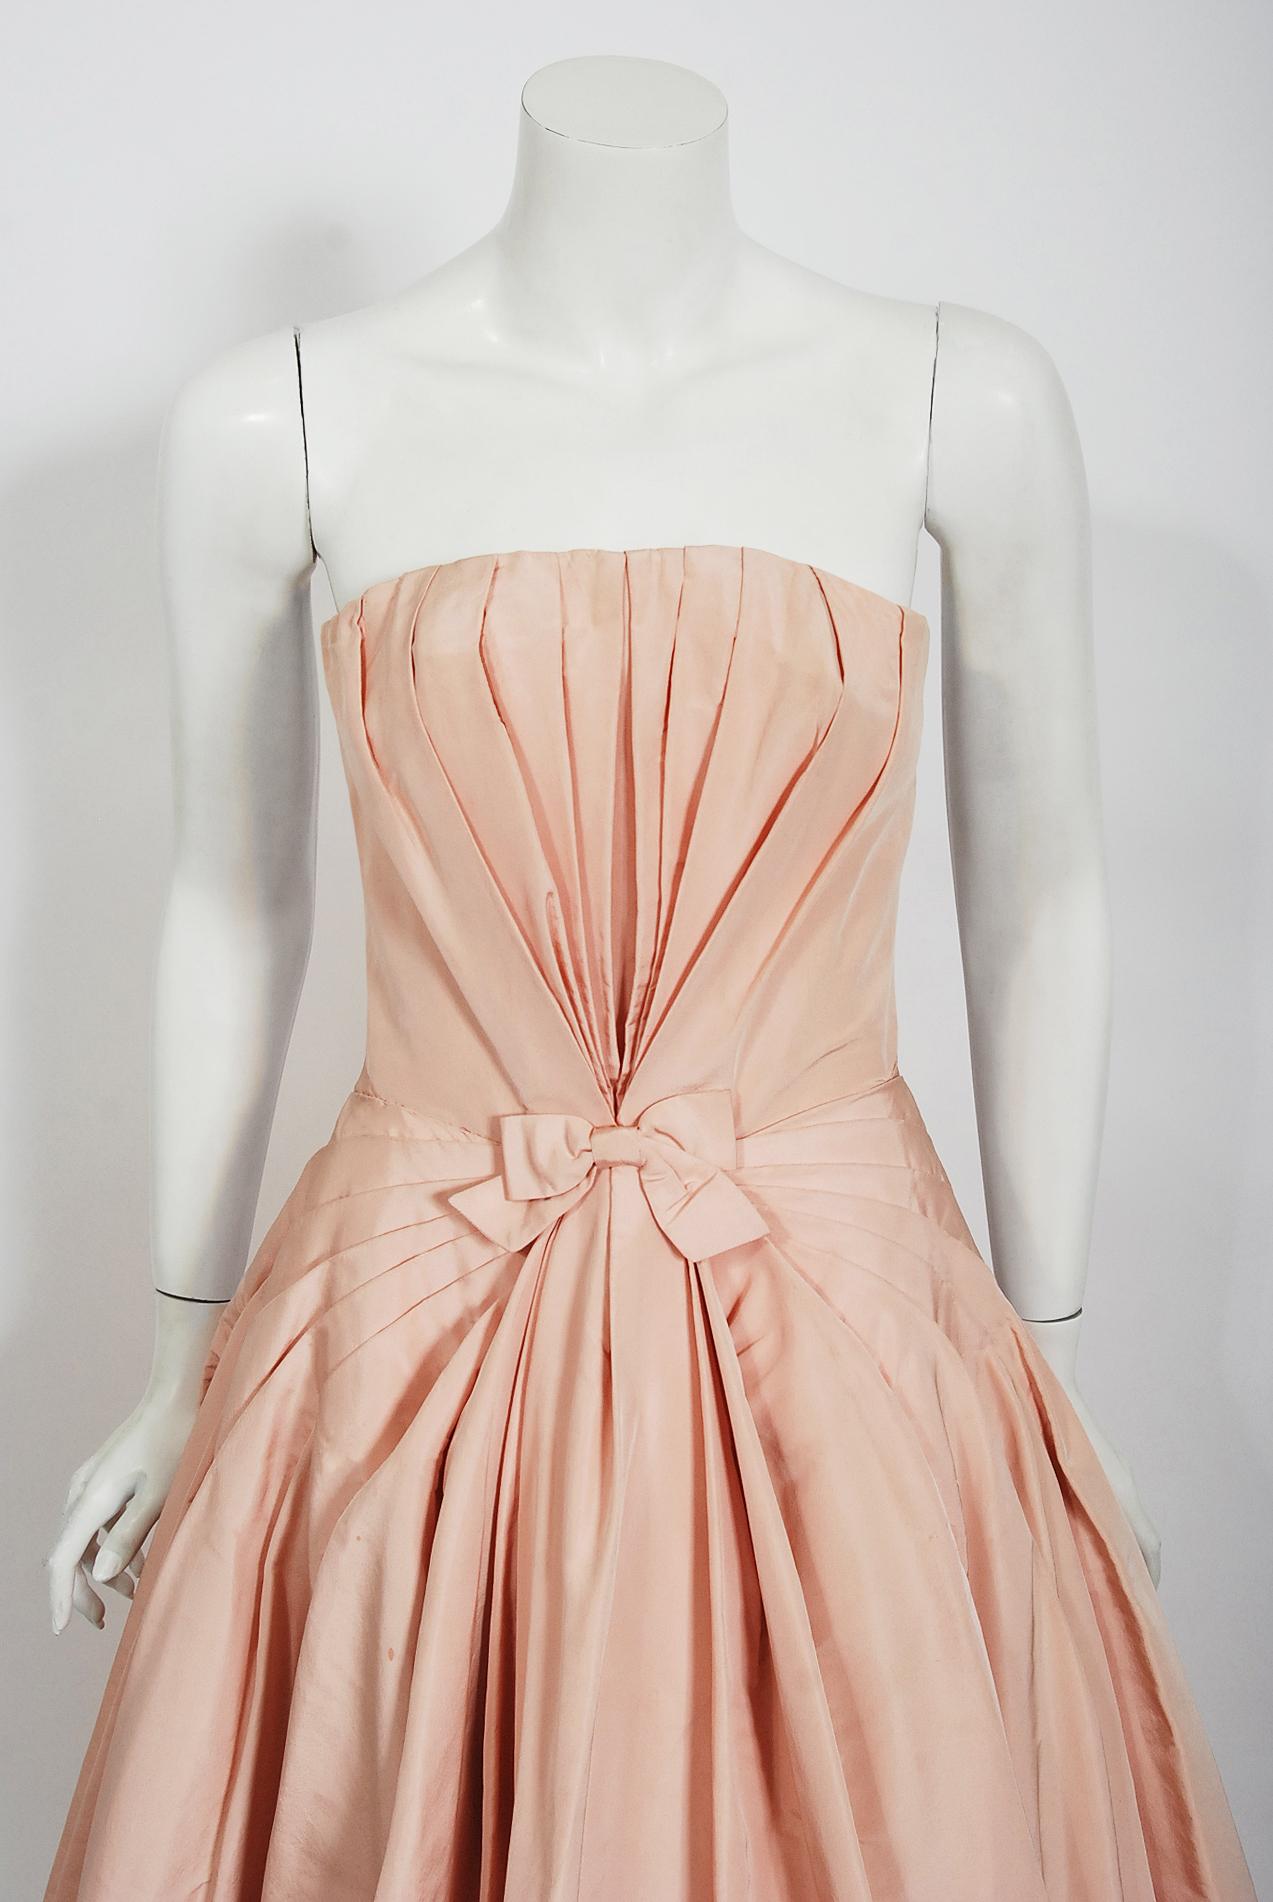 A gorgeous mid-century formal gown by the nearly impossible to find Italian couturier Mingolini Guggenheim. As you can see, this designer was heavily influenced by Christian Dior and any French inspired fashion pieces from this period are true